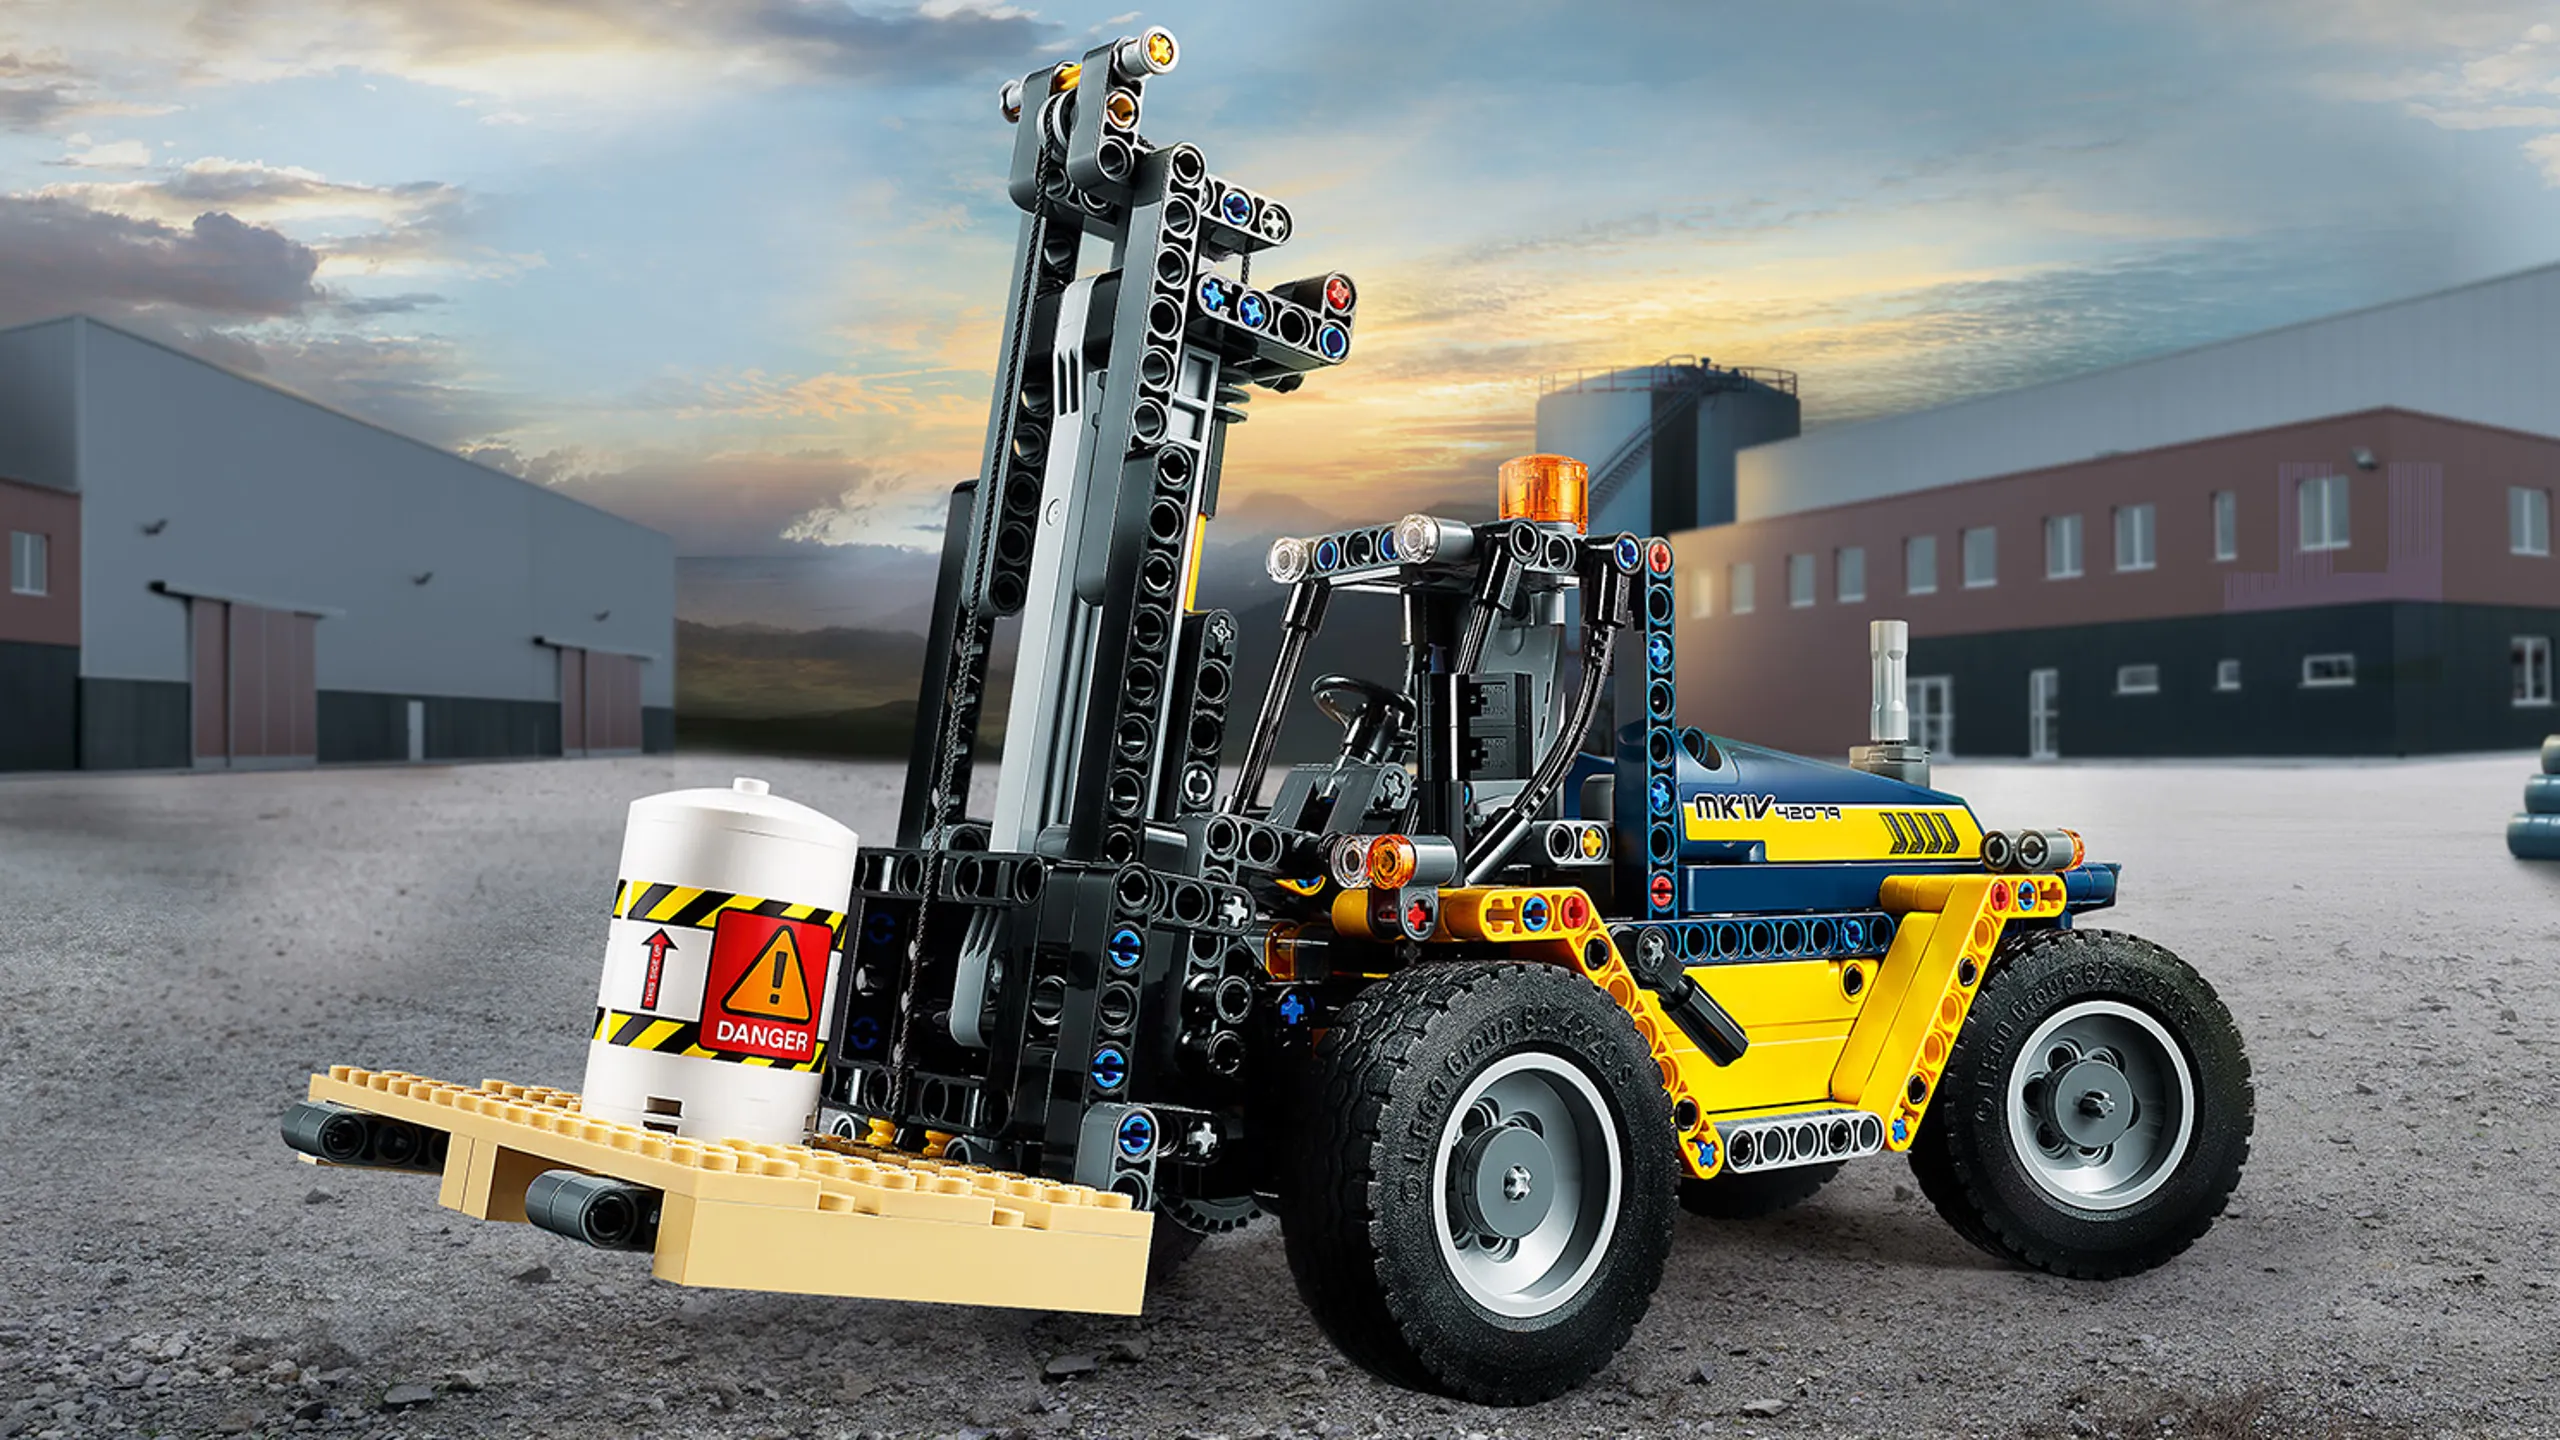 LEGO Technic - 42079 Heavy Duty Forklift - Transport and elevate any cargo with this heavy duty forklift that can reach hard-to-reach surfaces.